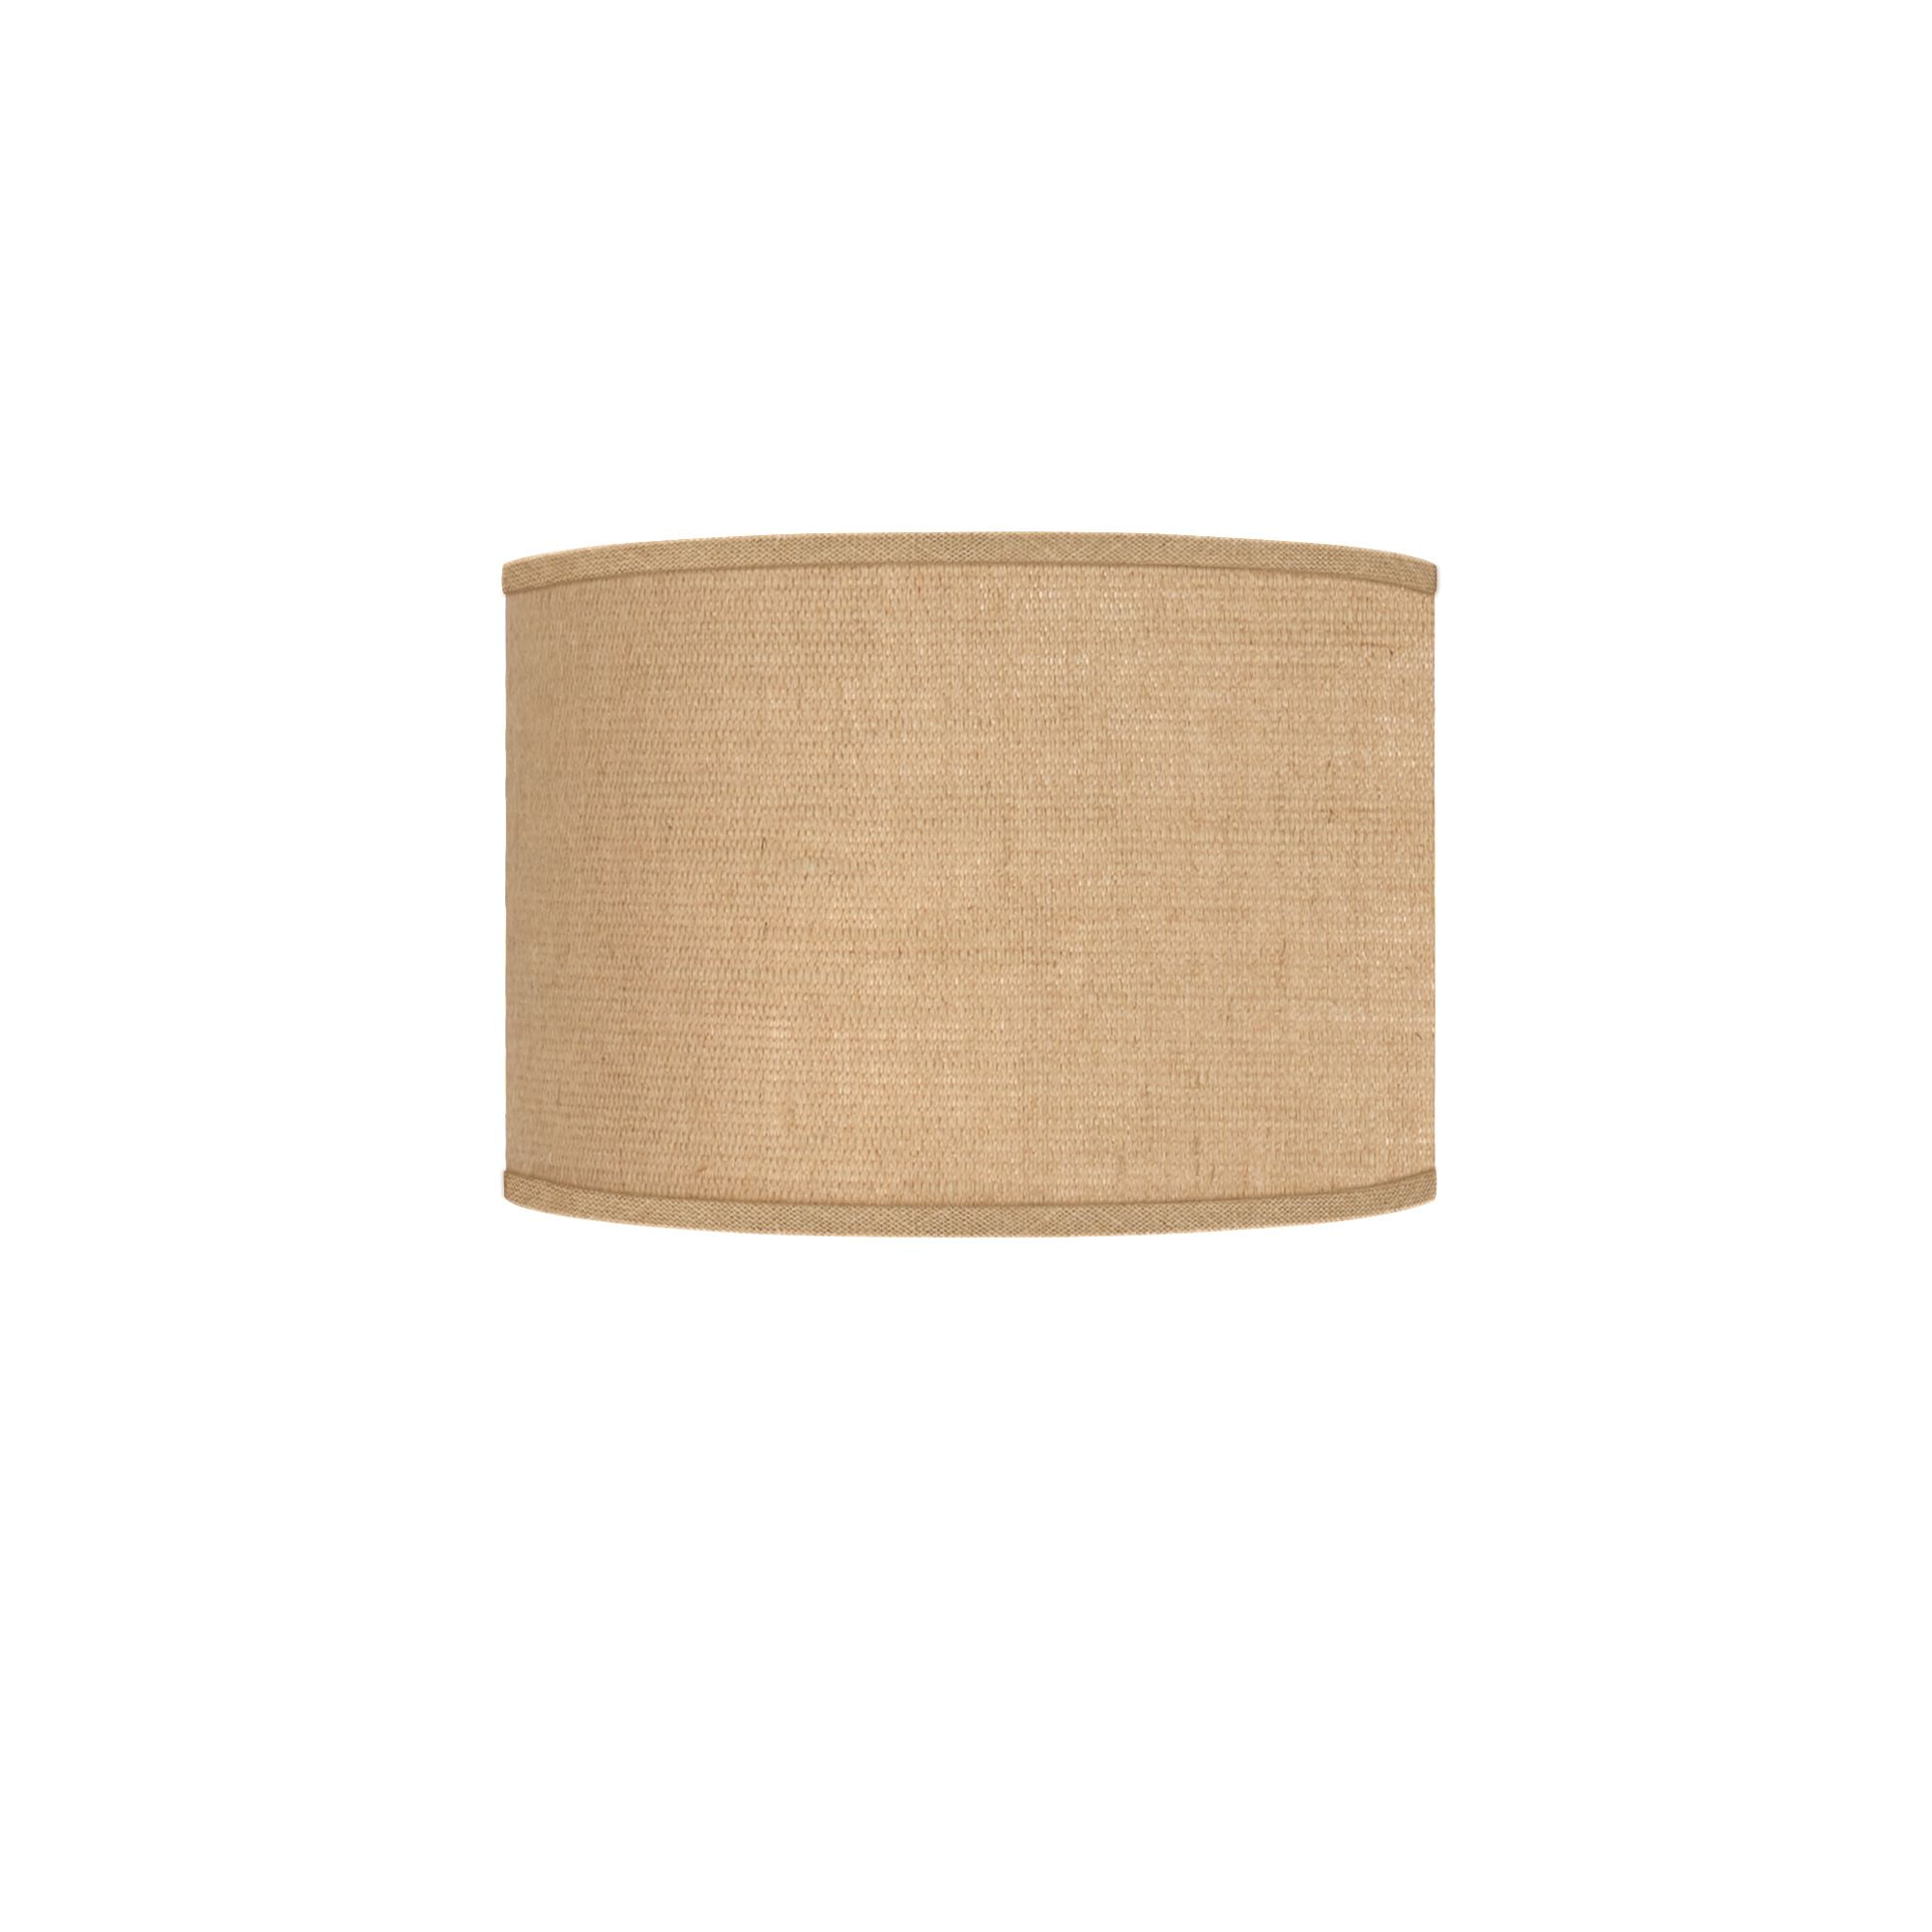 12" Burlap Lamp Shade Empire Shape Hand Rolled Lampshade Earth Brown Quality NEW 